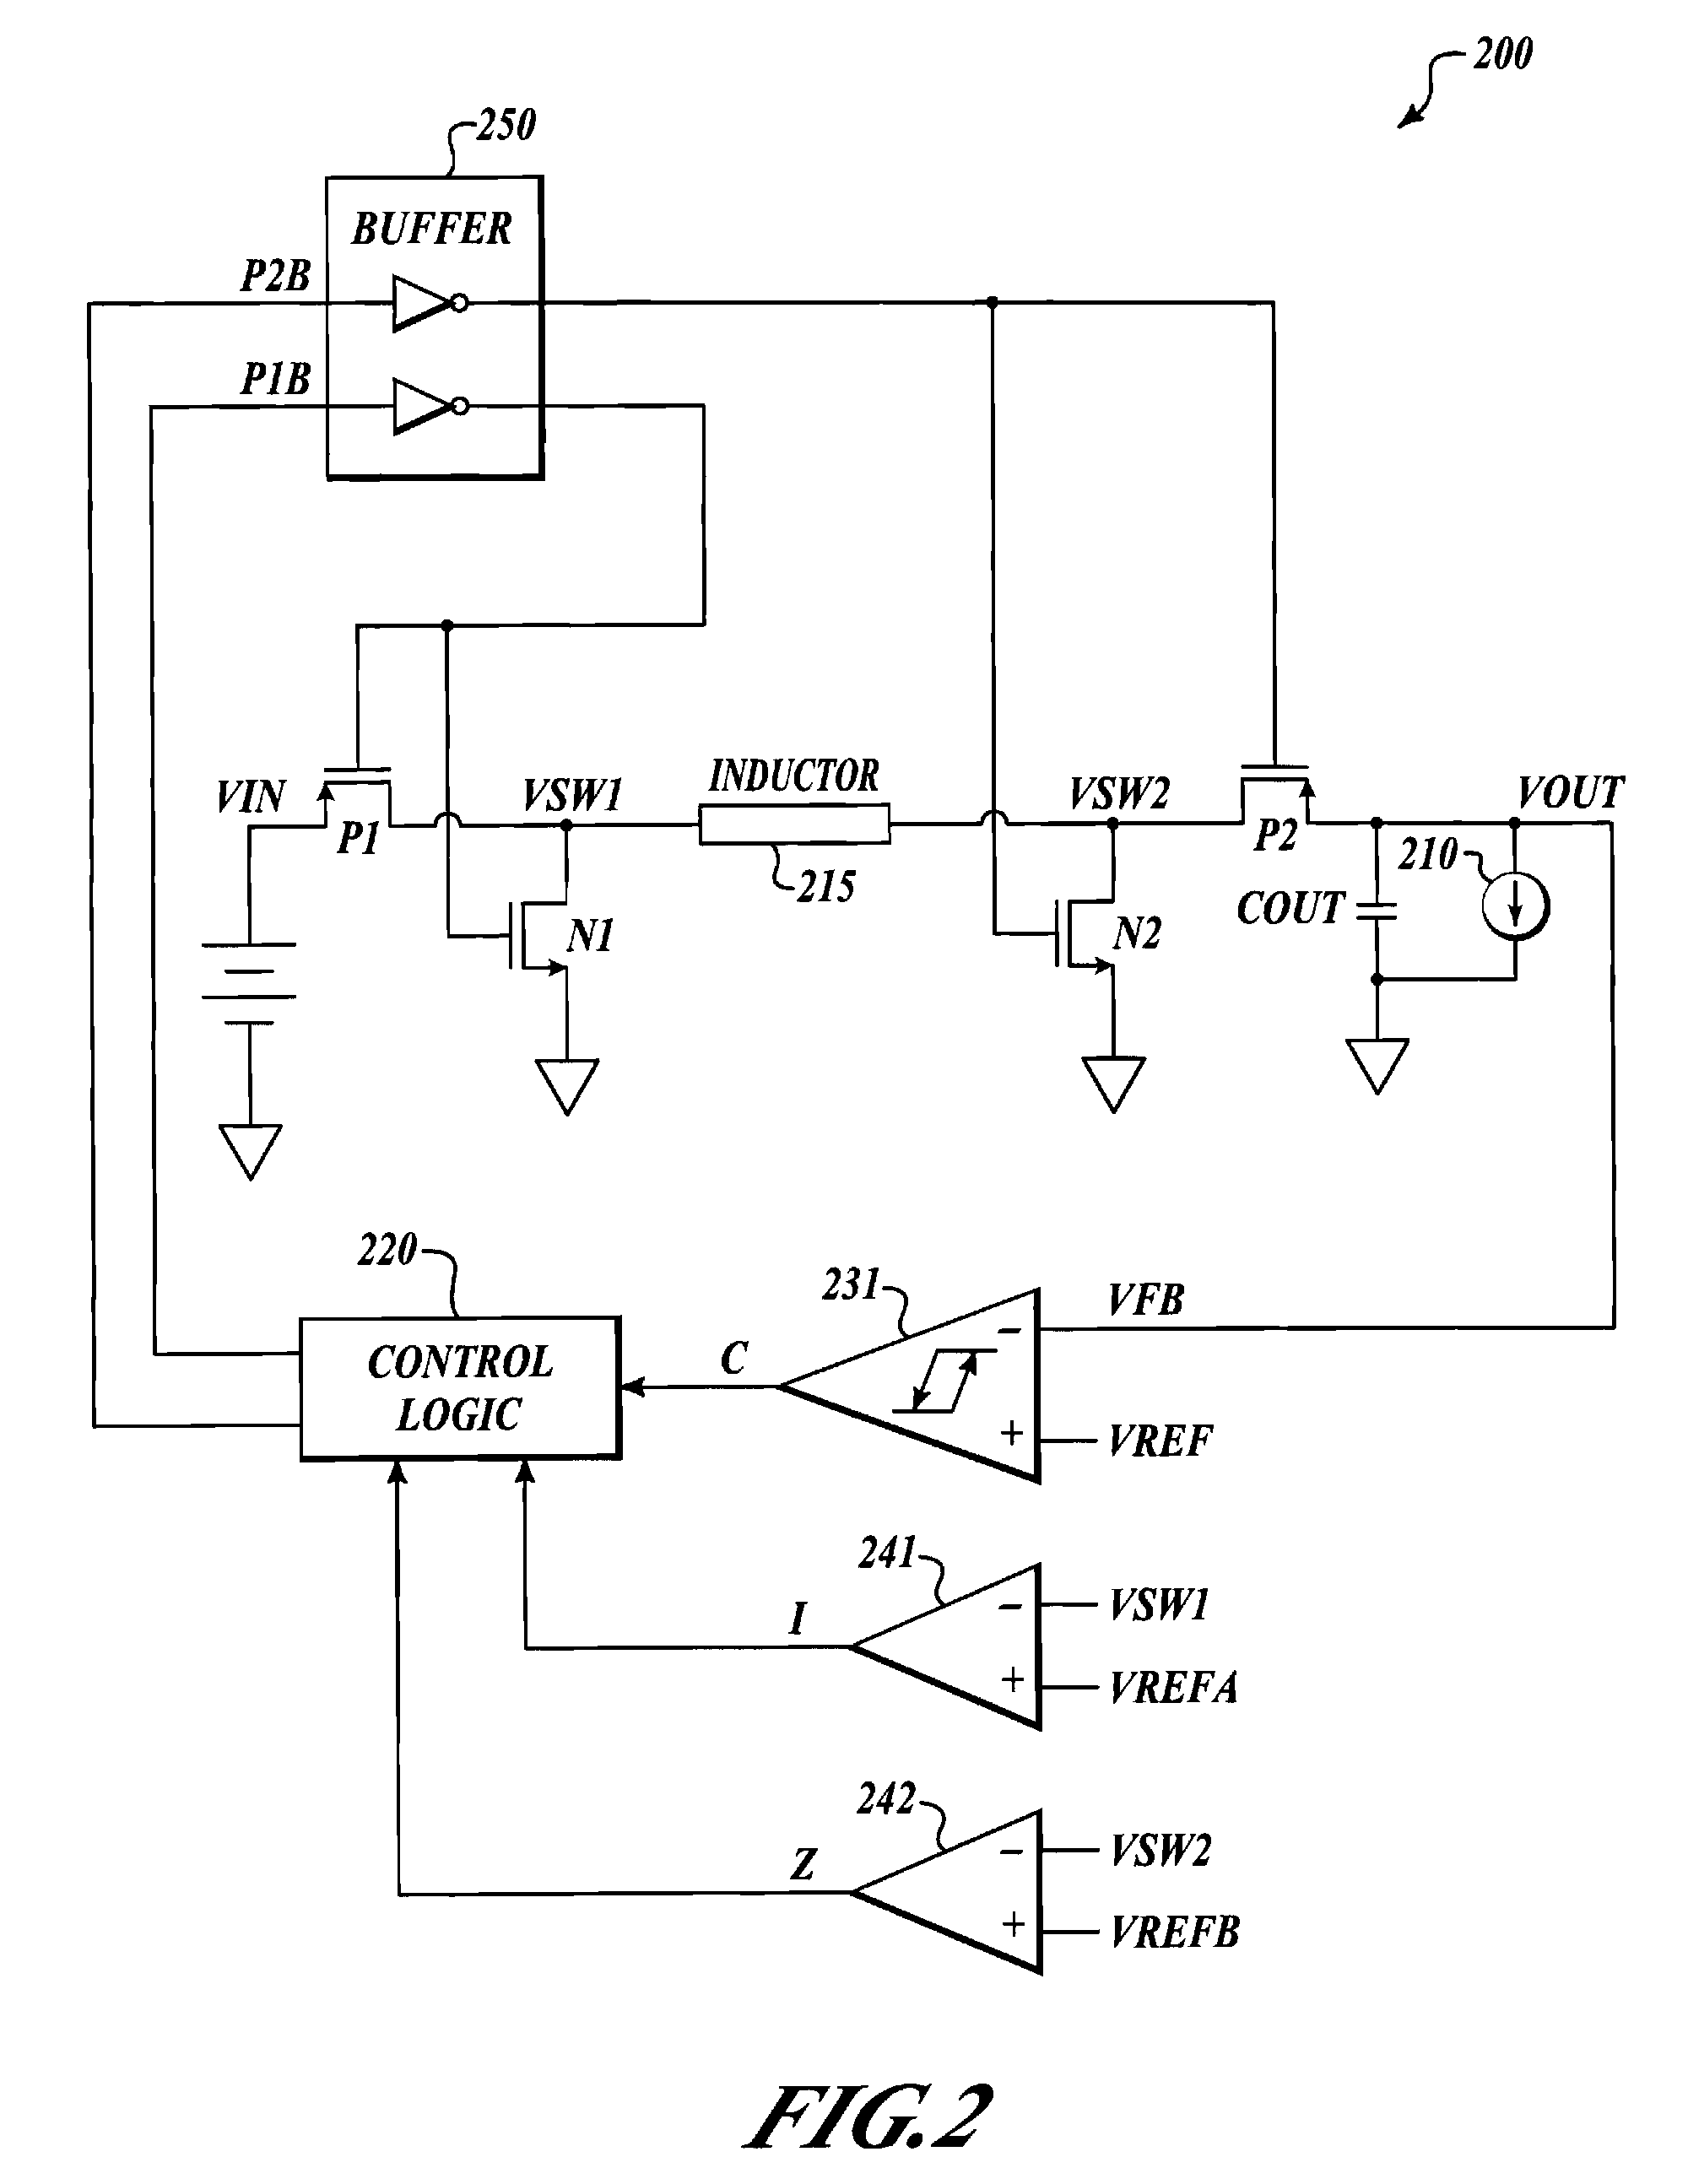 Apparatus and method for PFM buck-or-boost converter with smooth transition between modes